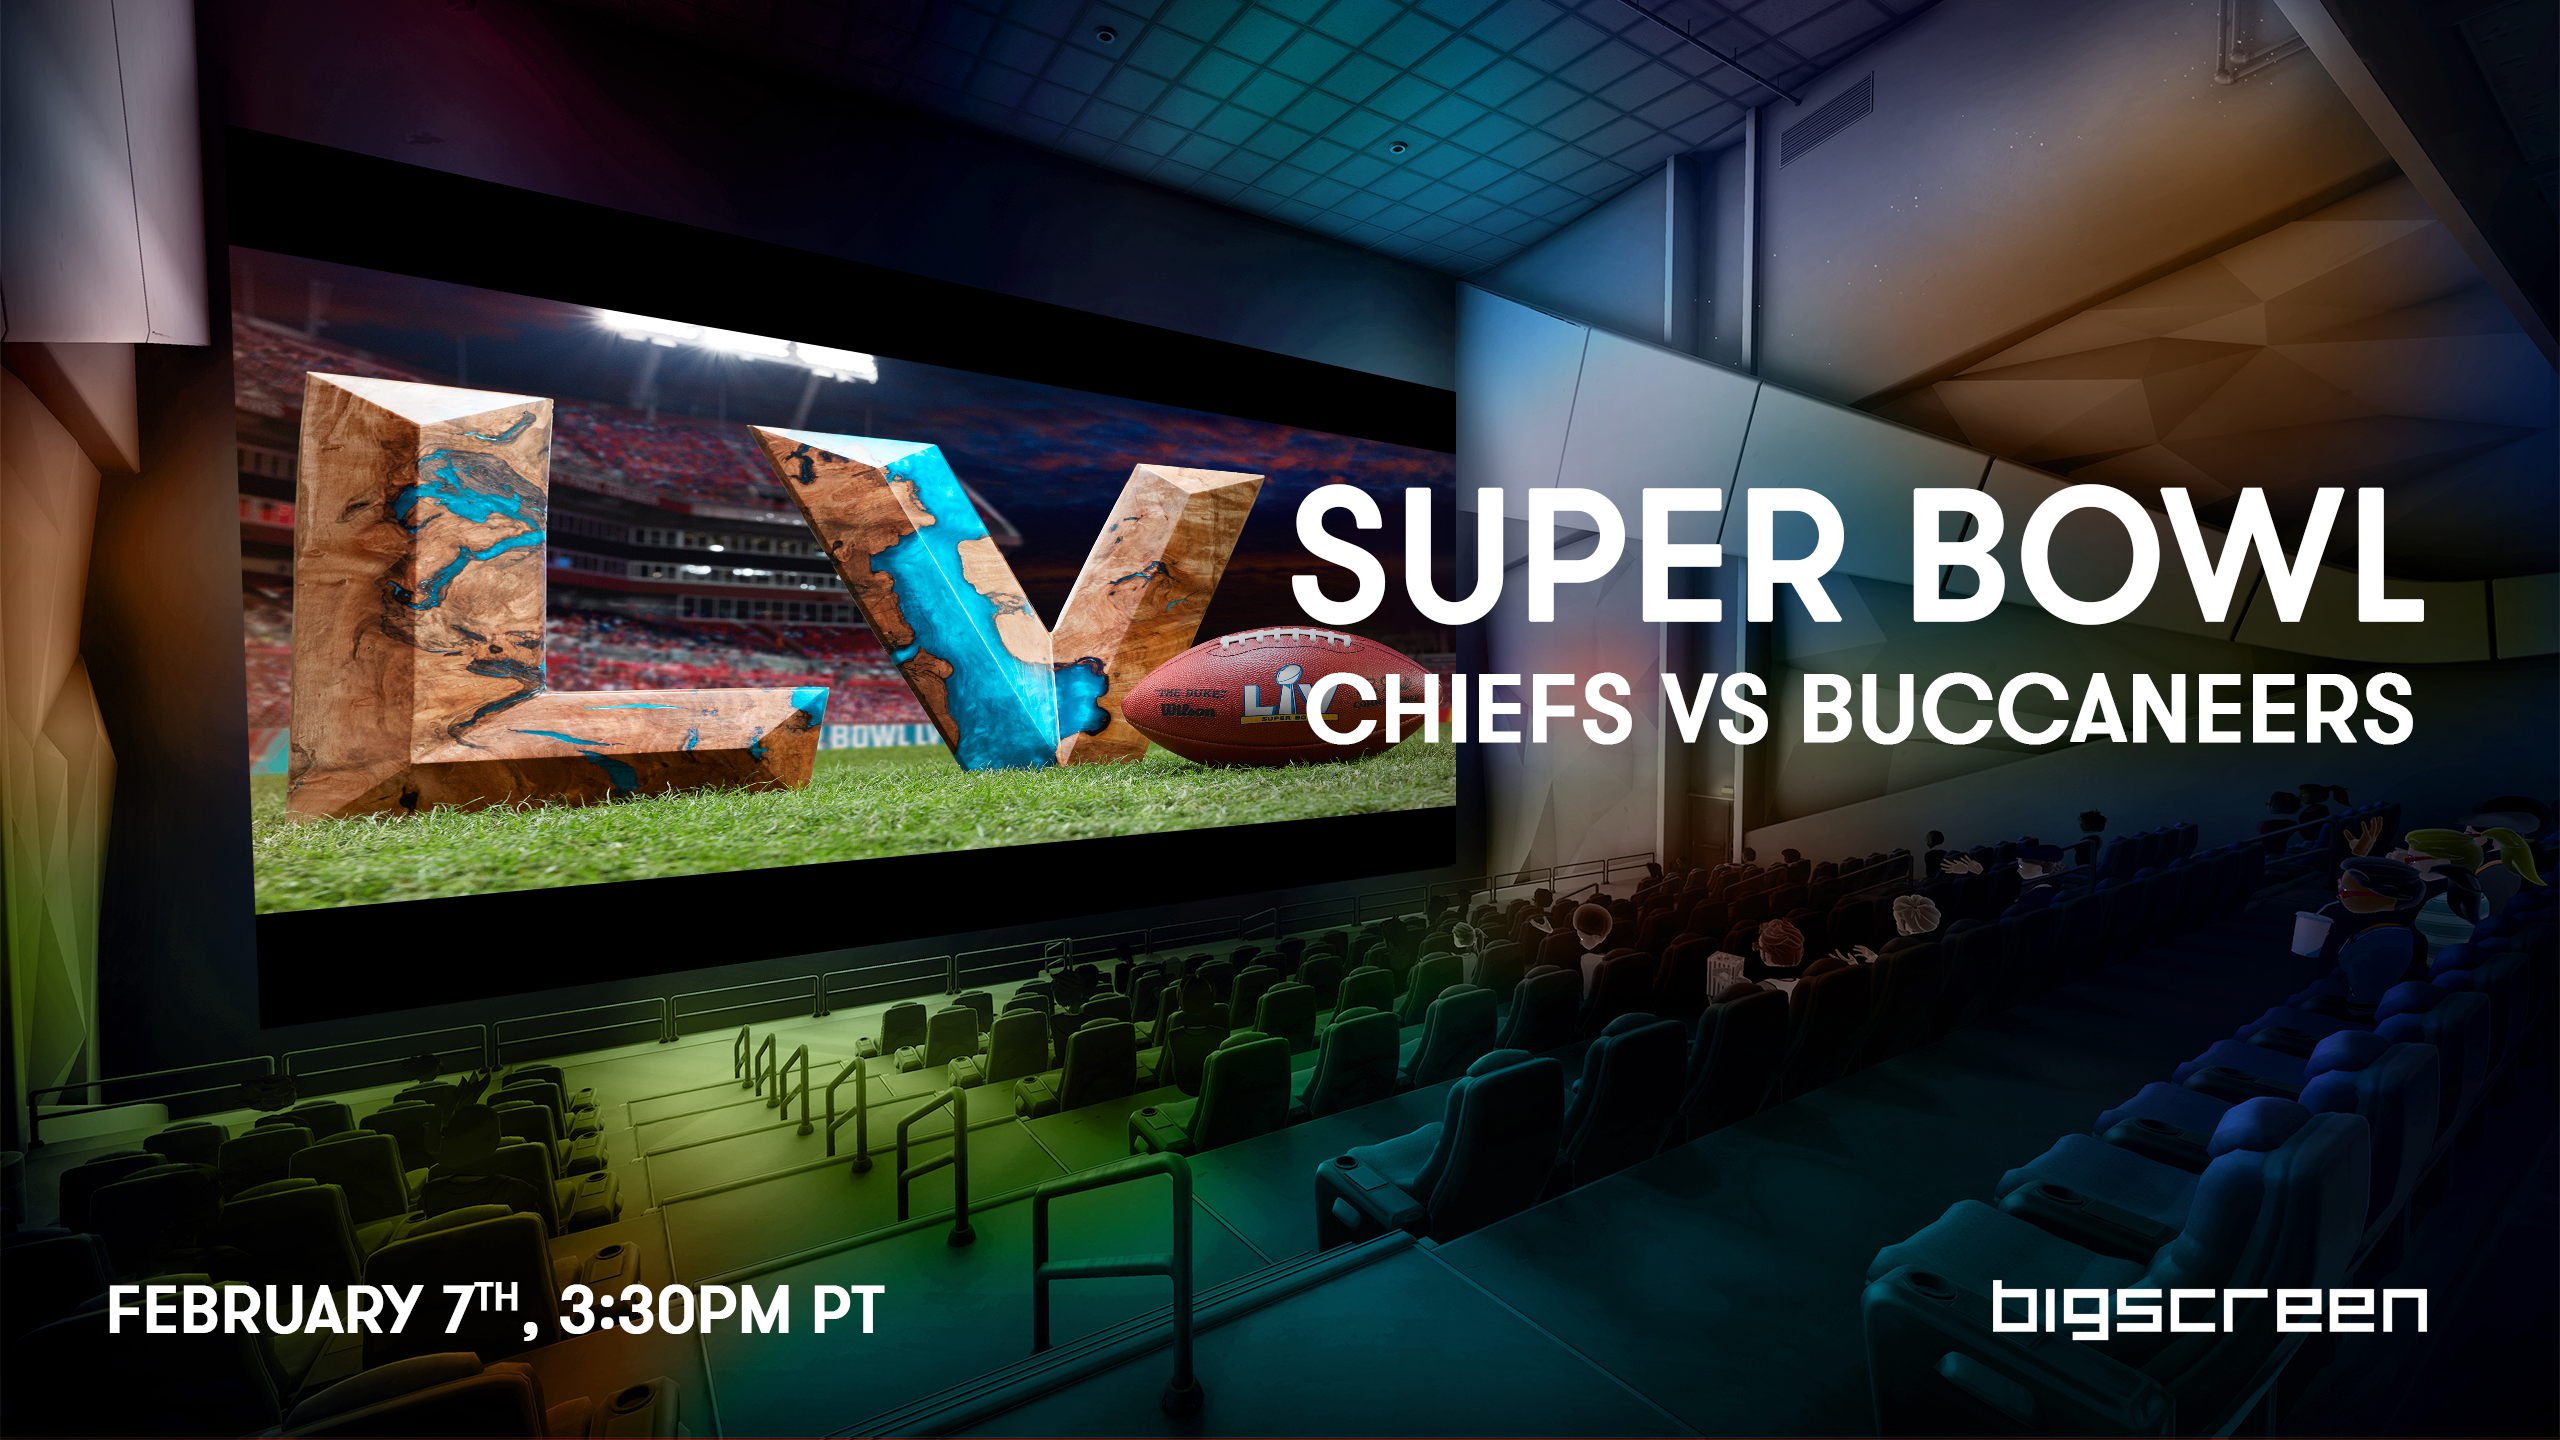 sofa Den anden dag delvist Watch The Super Bowl For Free In VR With 'Bigscreen' - VRScout